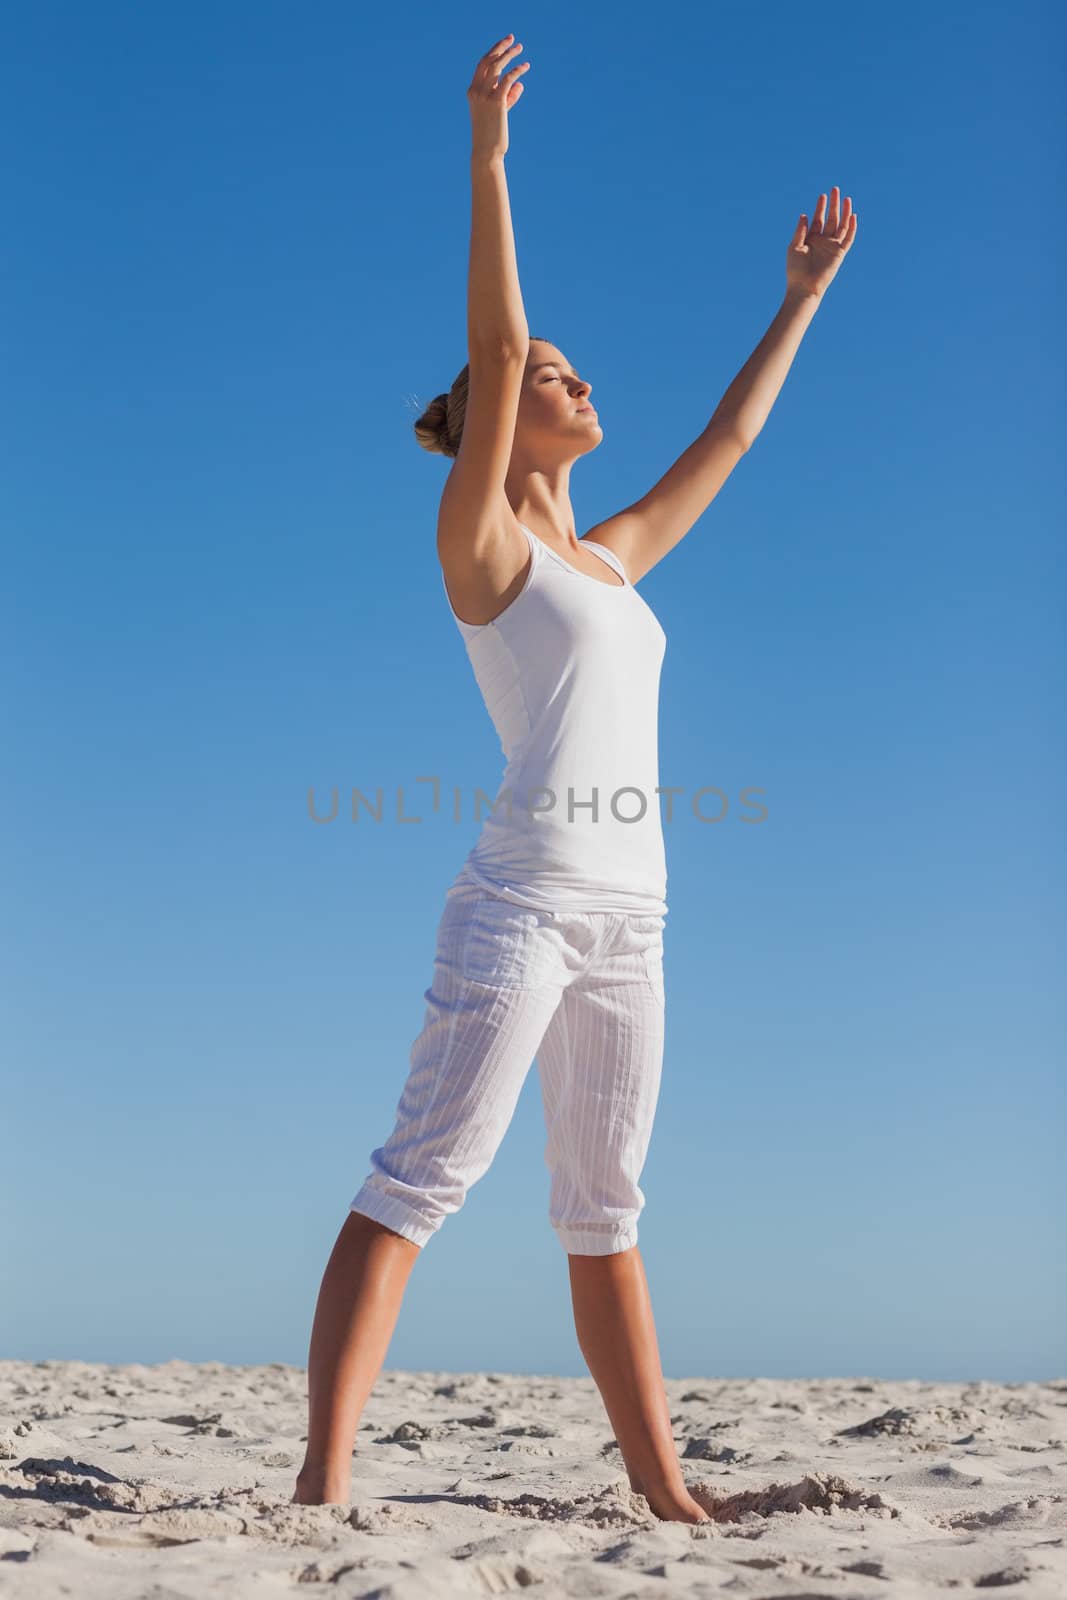 Woman practicing yoga at beach on a sunny day